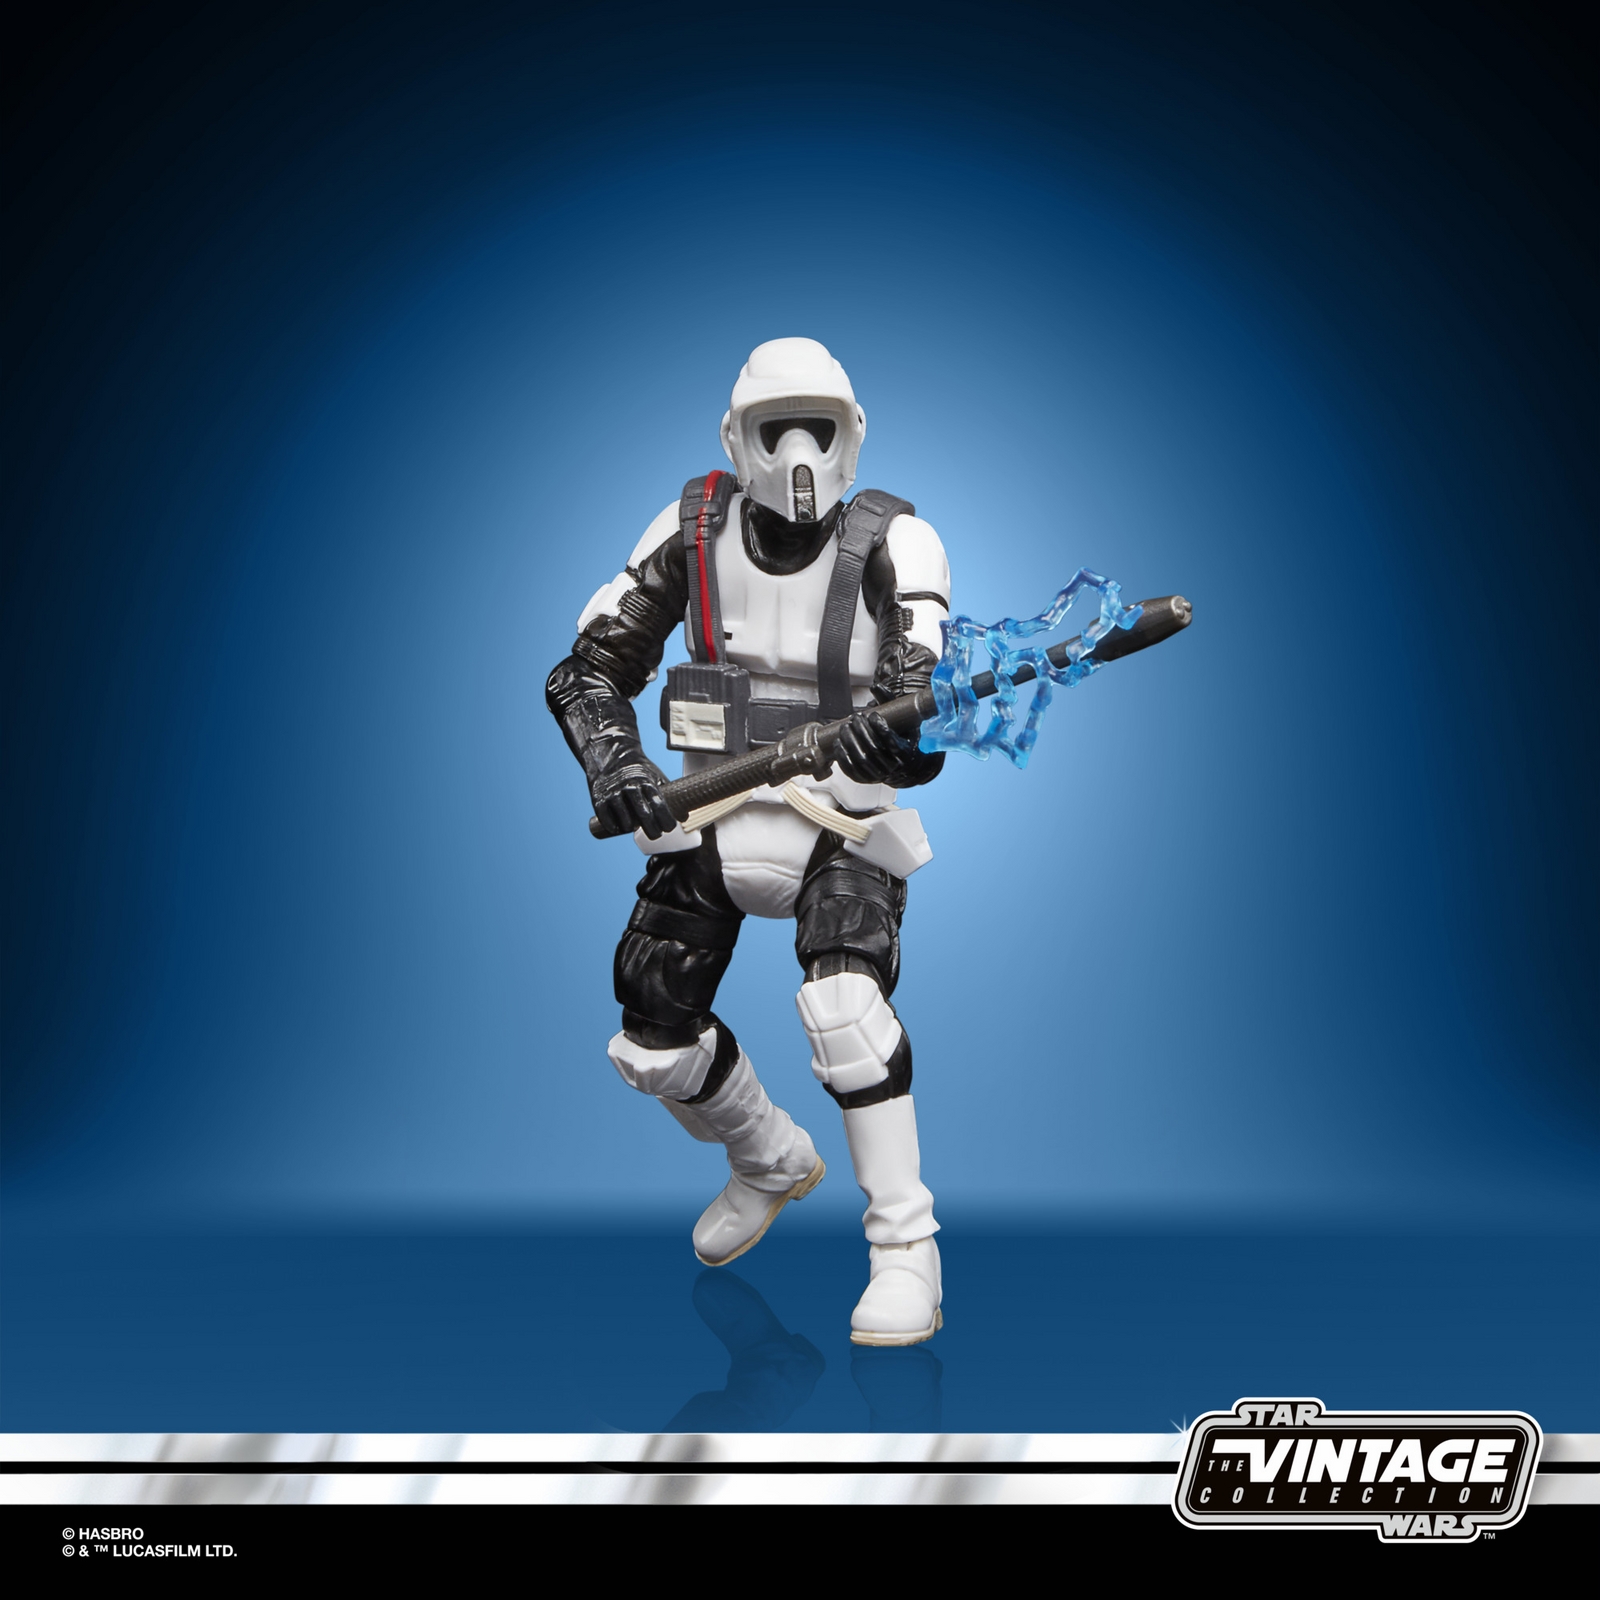 STAR WARS THE VINTAGE COLLECTION GAMING GREATS 3.75-INCH SHOCK SCOUT TROOPER Figure (6).jpg